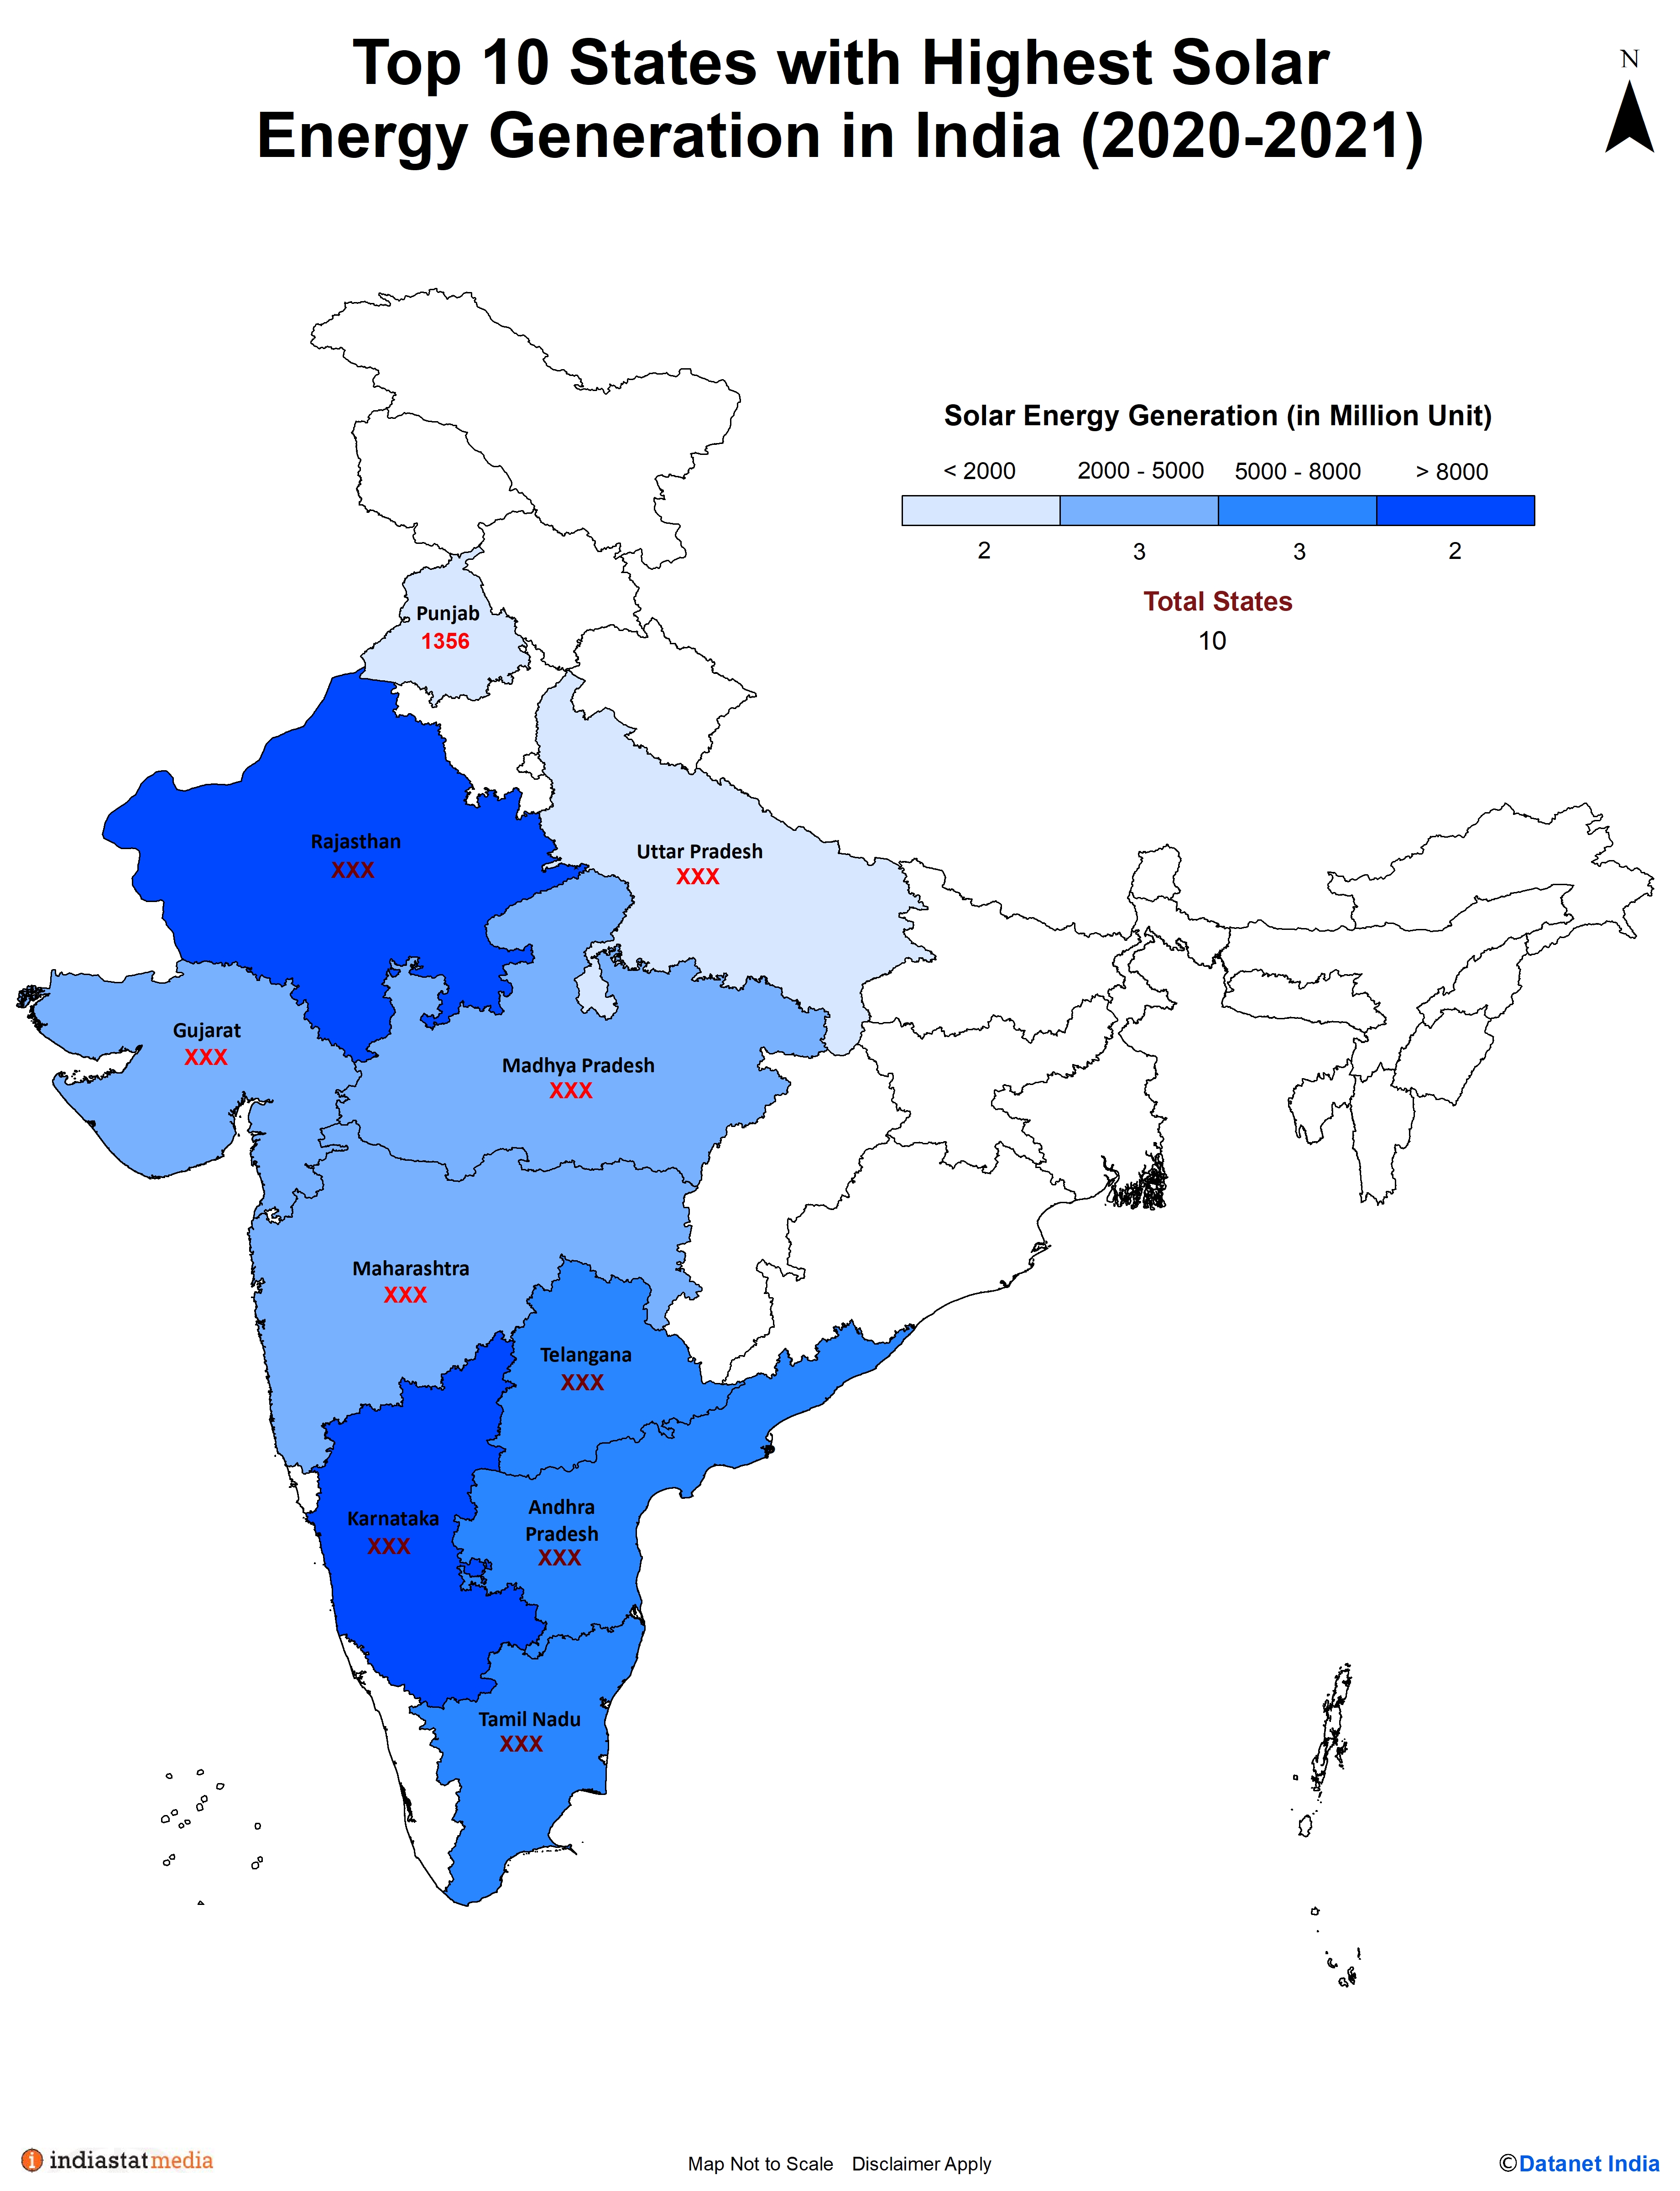 Top 10 States with Highest Solar Energy Generation in India (2020-2021)